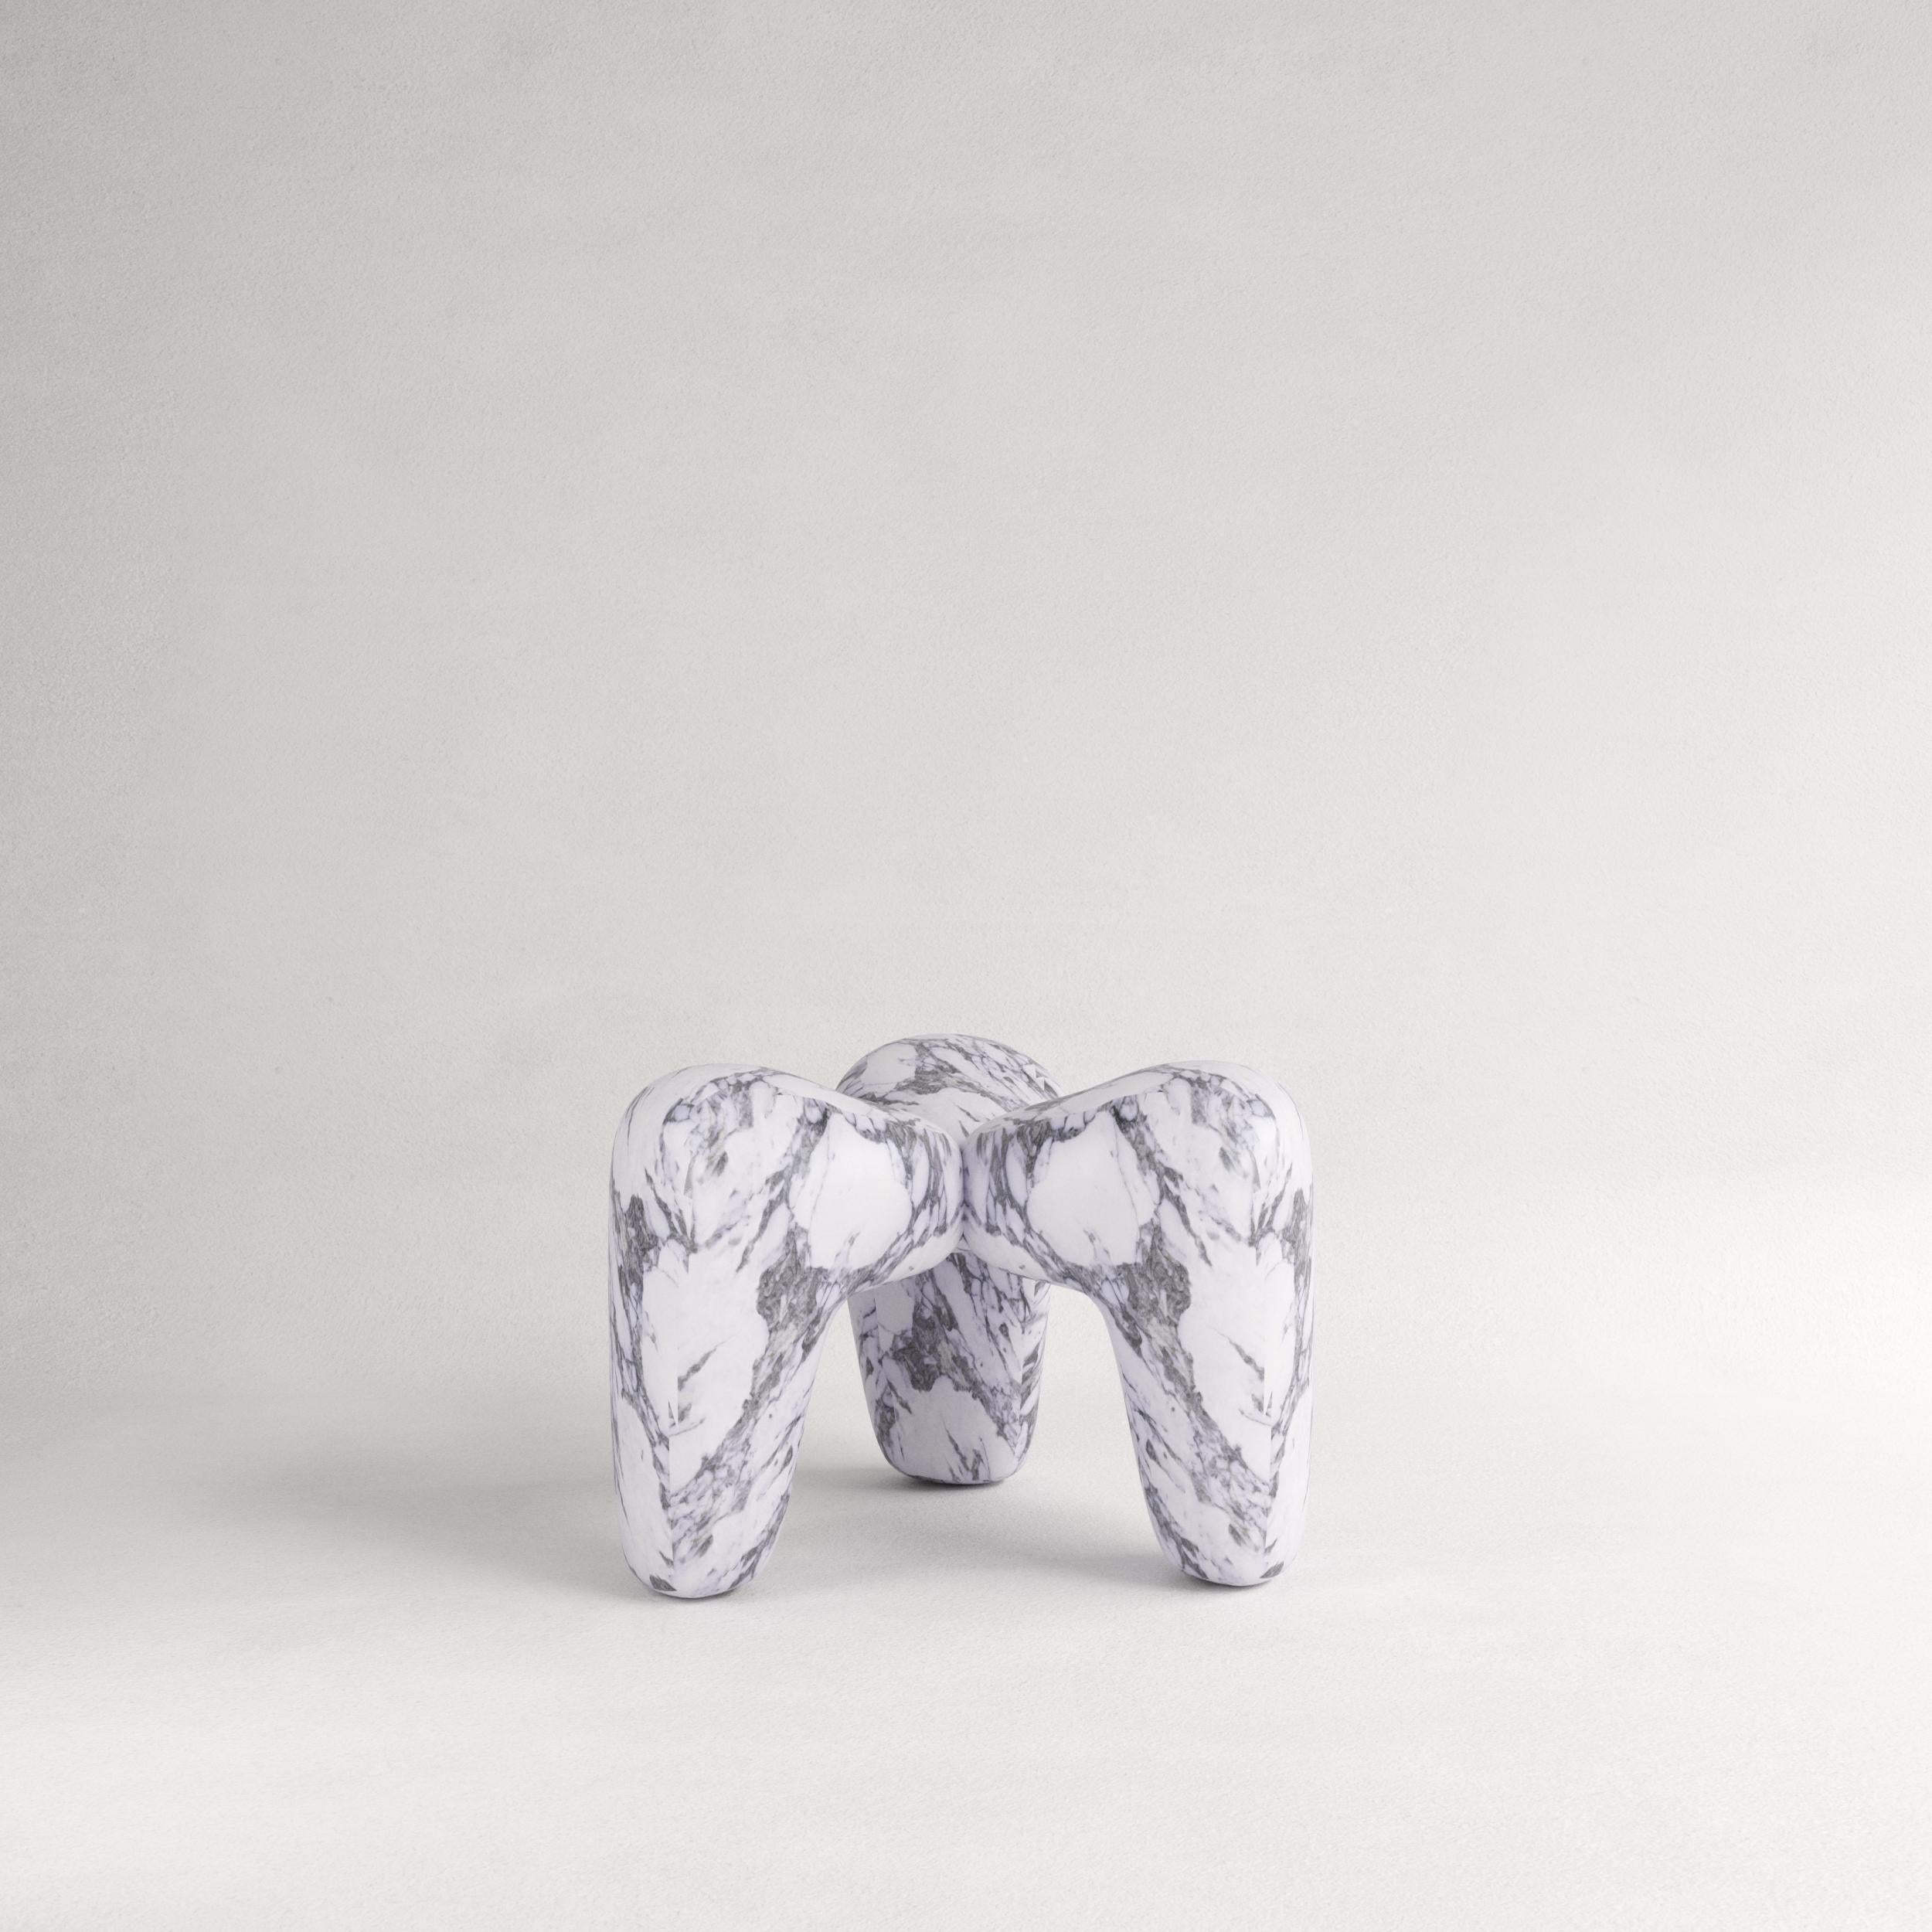 Pele de Tigre Triplo Stool by Andre Teoman Studio
Dimensions: W 70 x D 70 x H 45 cm
Materials: Marble

Introducing Triplo, a marble stool that challenges traditional perceptions of rigidity and weight. Crafted from marble, Triplo perfectly balances